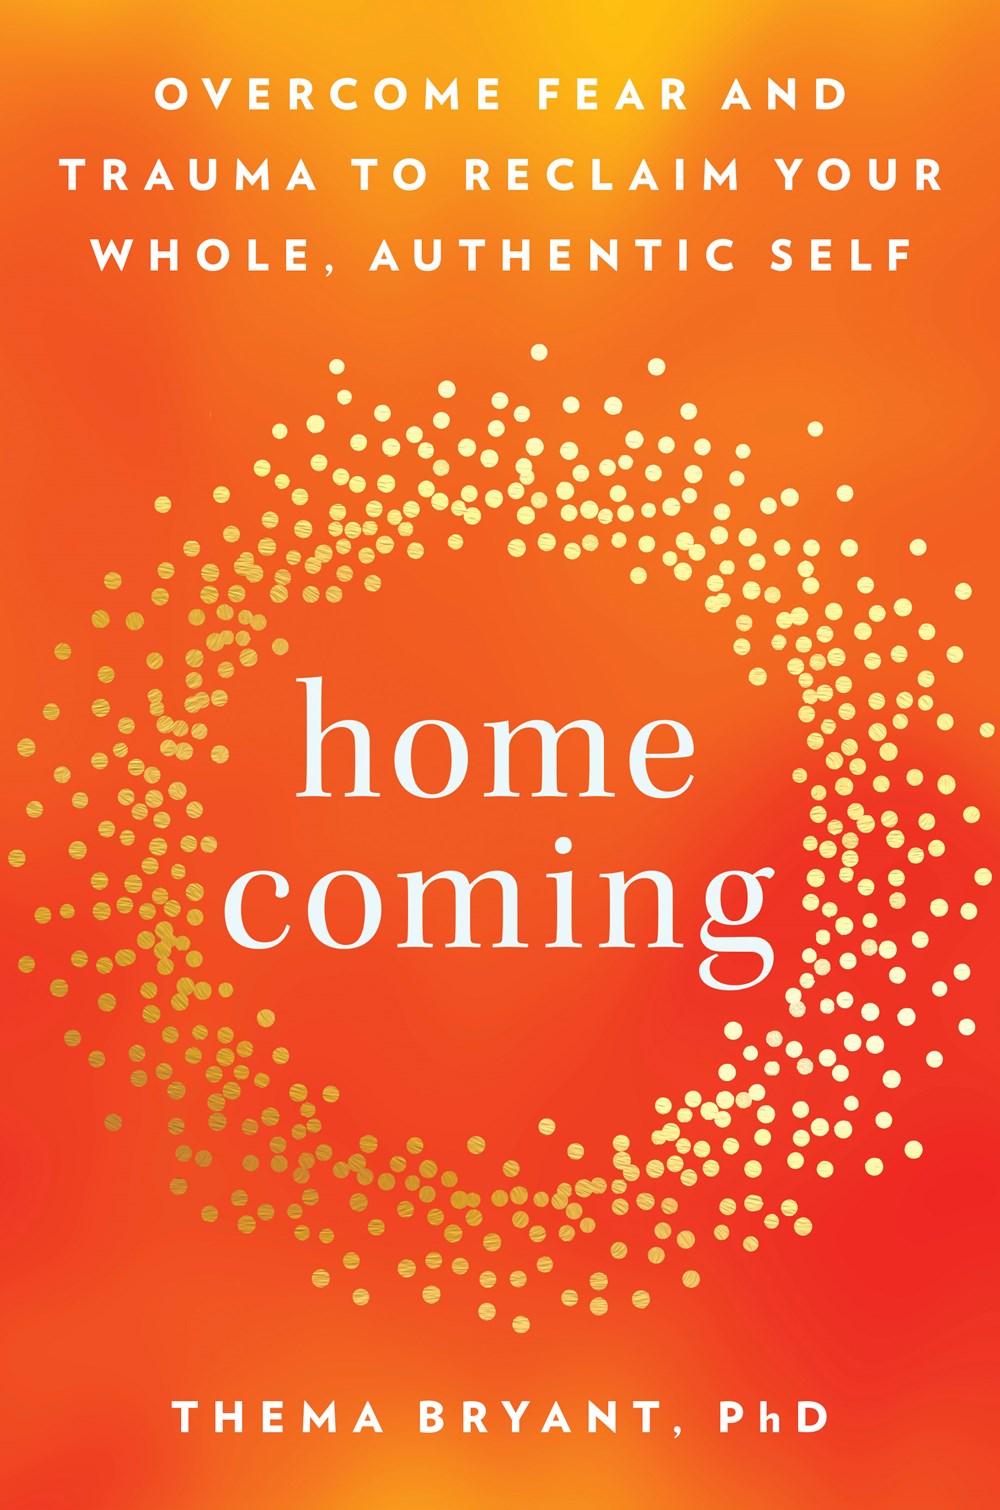 Homecoming: Overcome Fear and Trauma to Reclaim Your Whole, Authentic Self